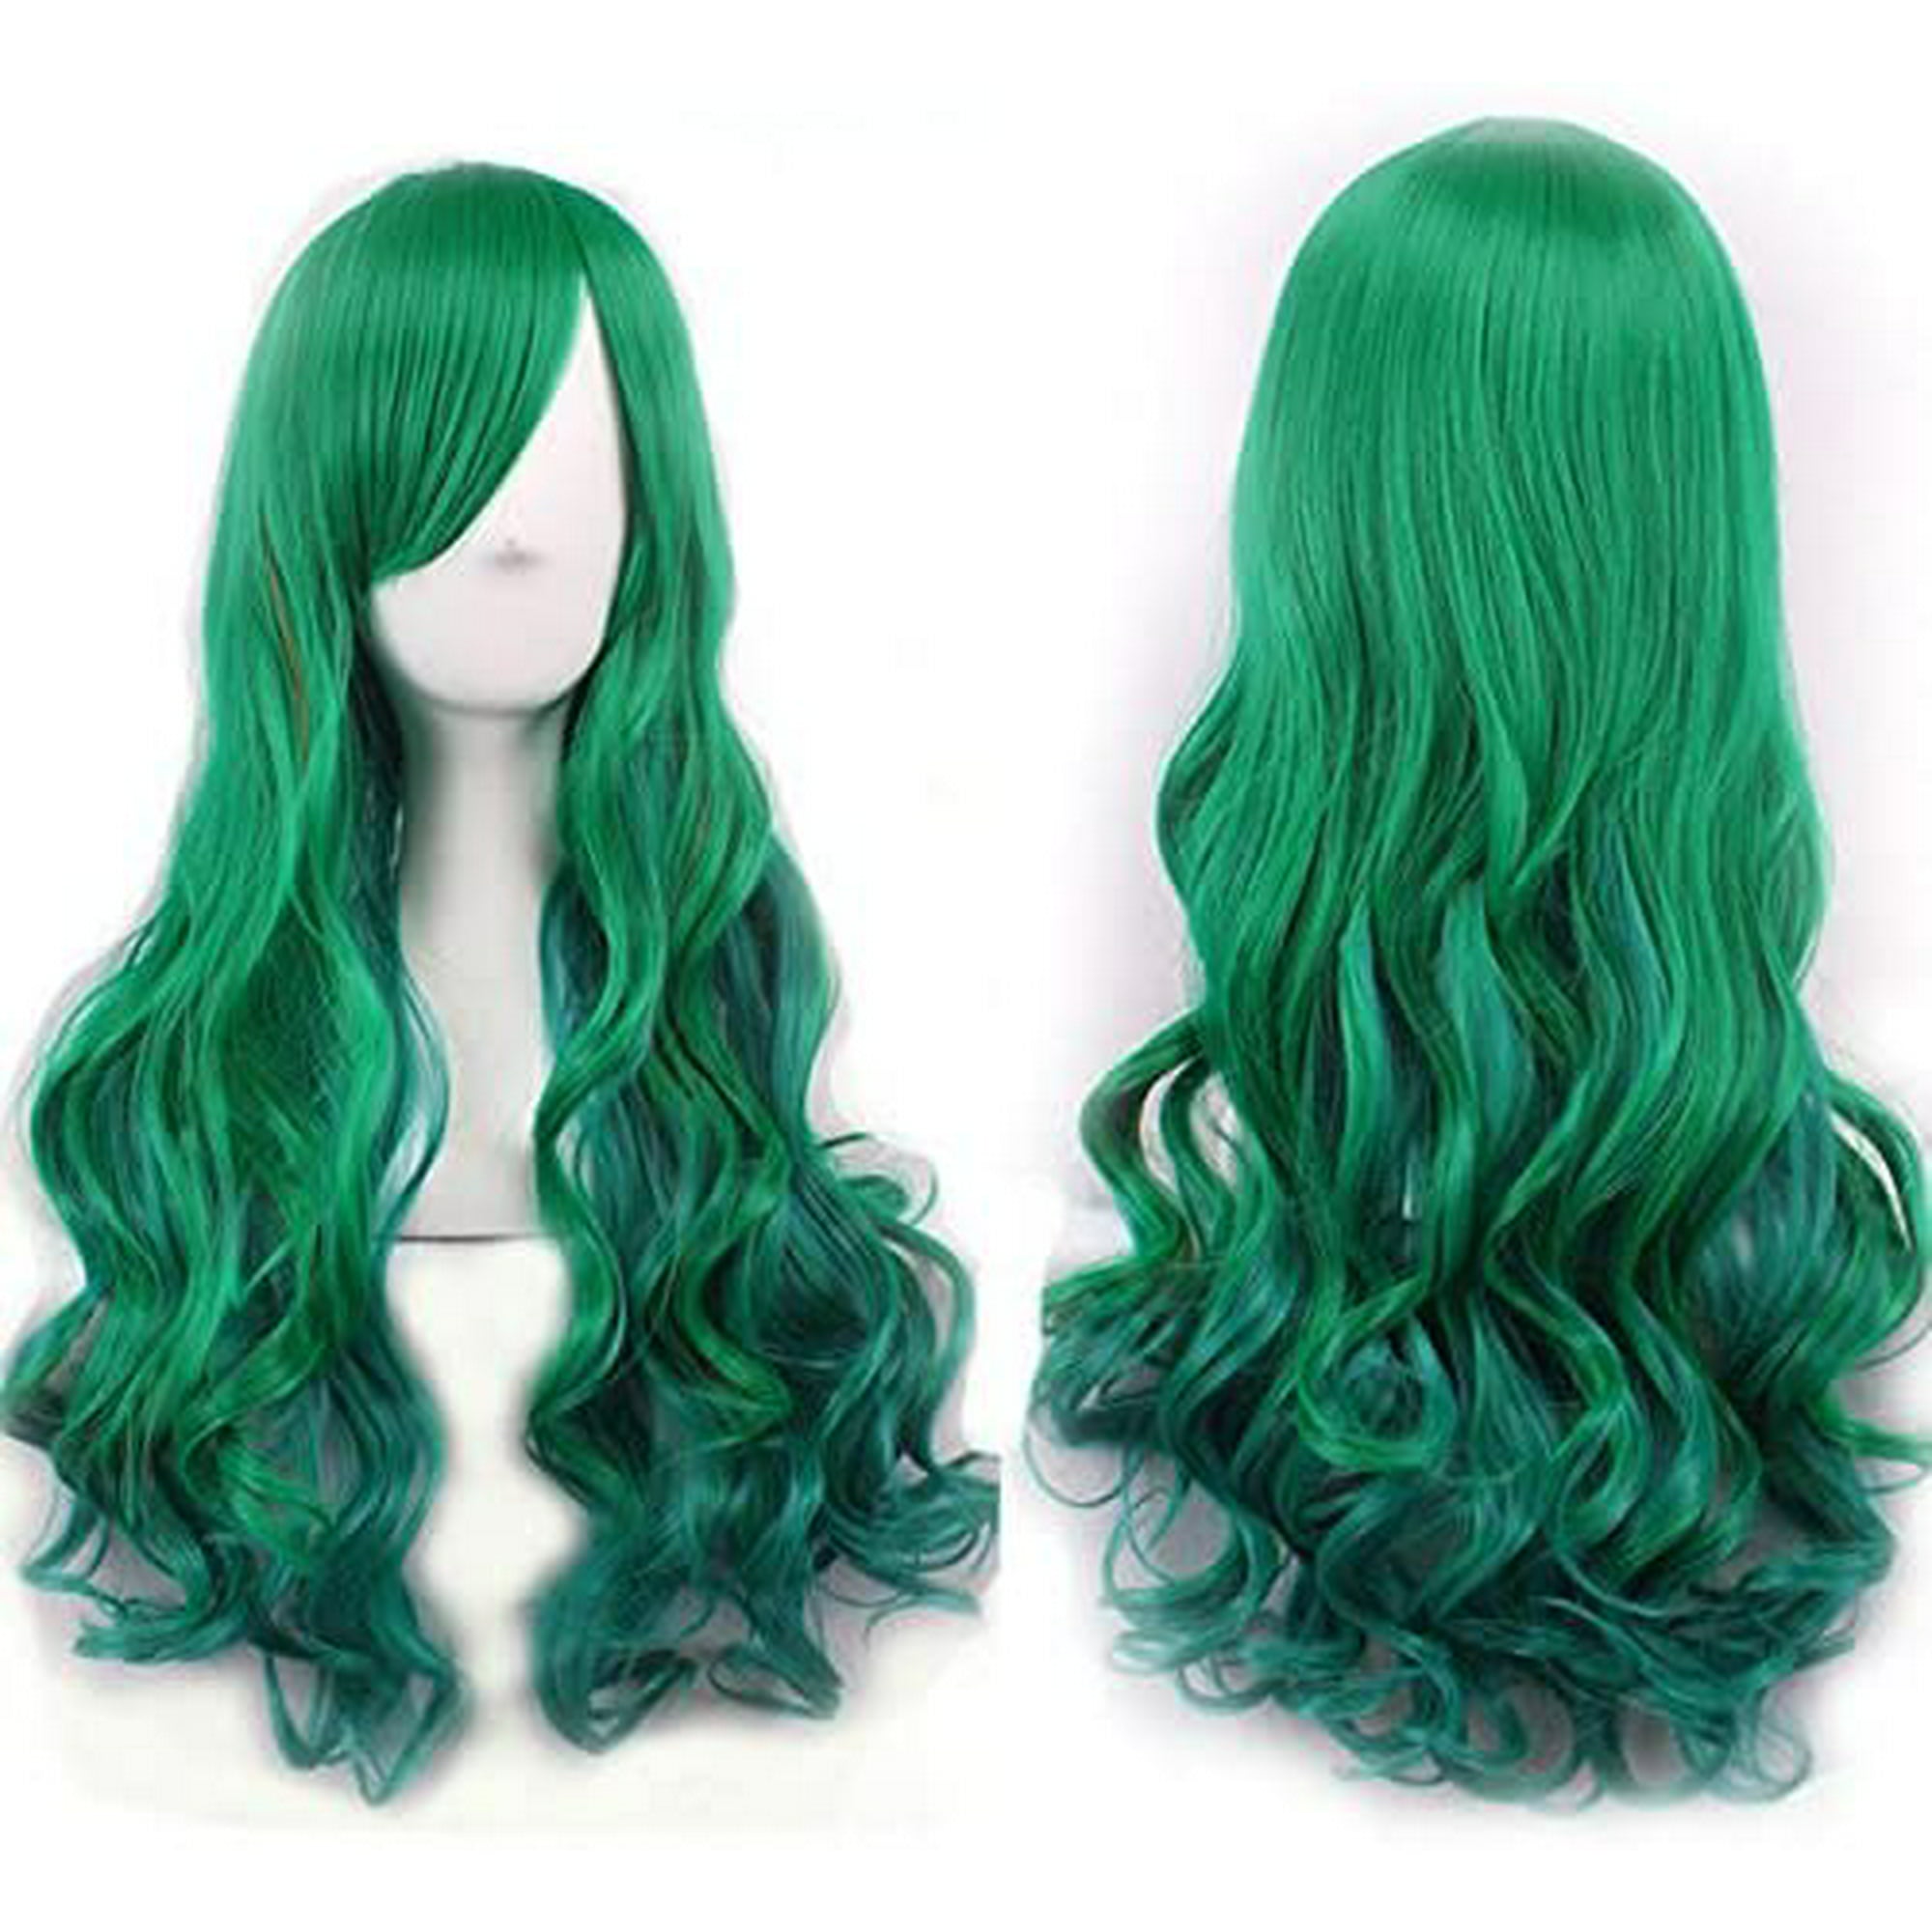 Women's Green Wig Long Curly Hair Heat Resistant Fiber Wigs Harajuku Lolita  Style for Cosplay Halloween Party | Walmart Canada